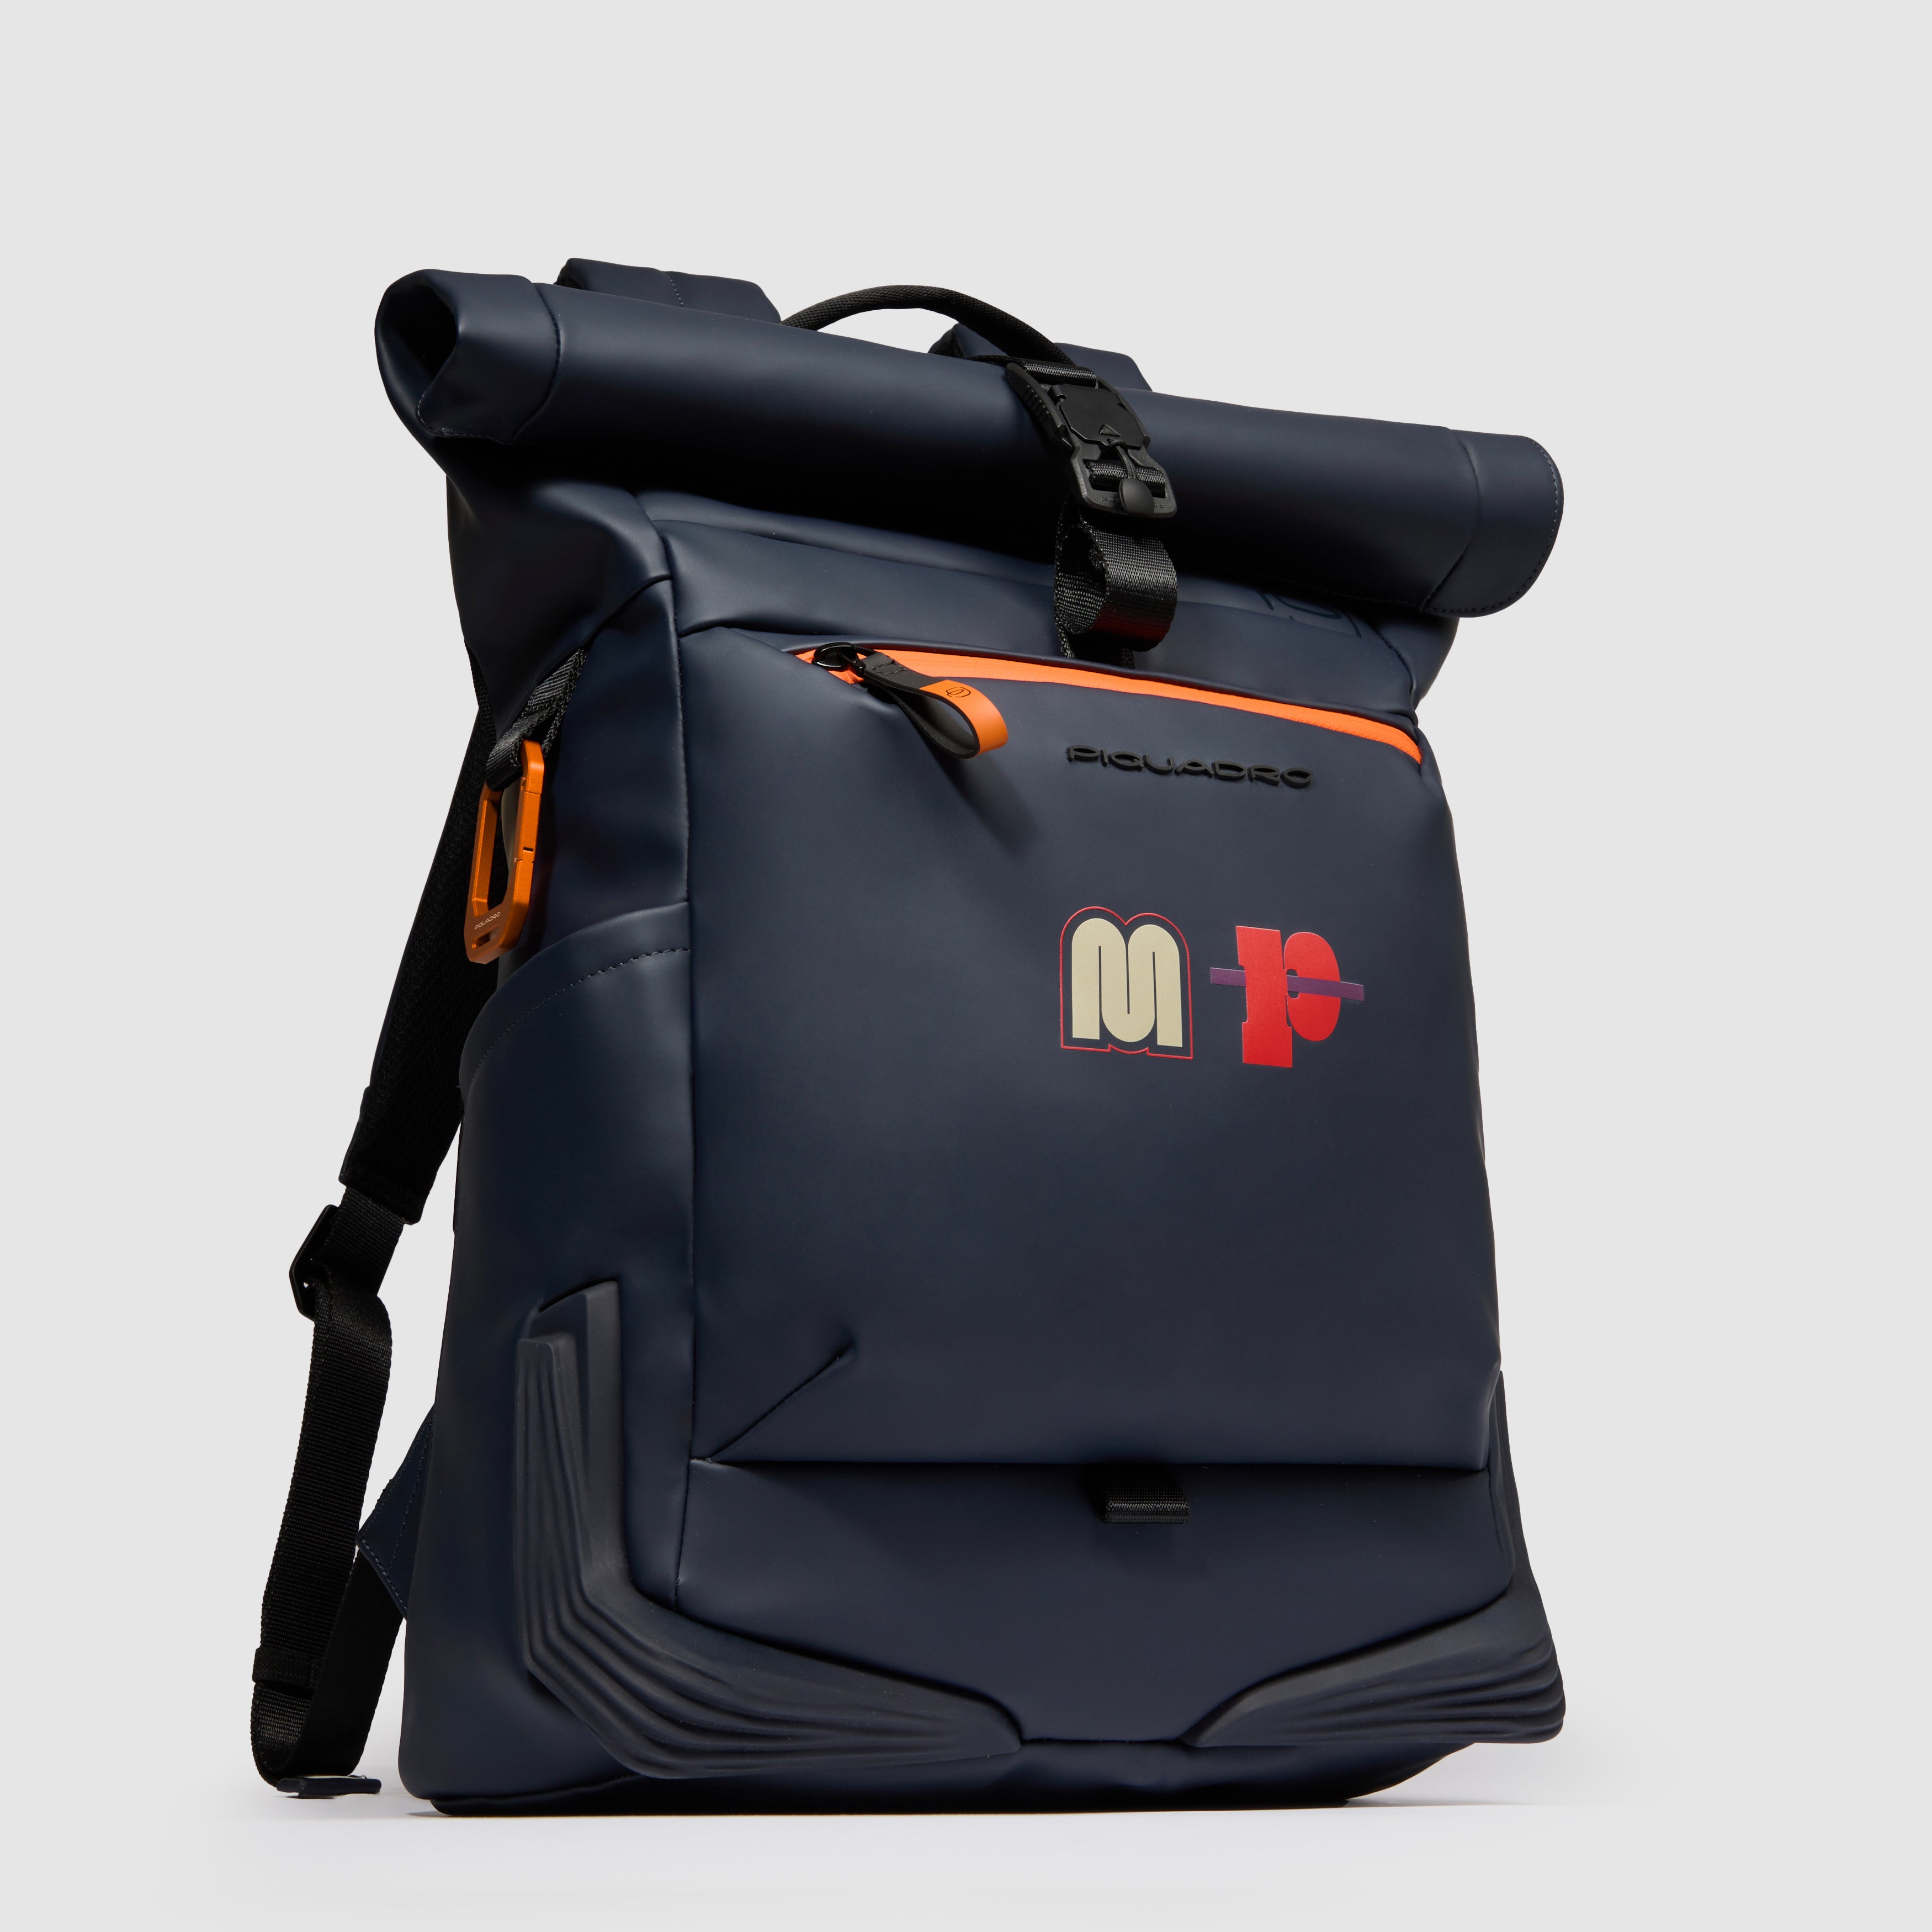 Personalized backpacks and briefcases